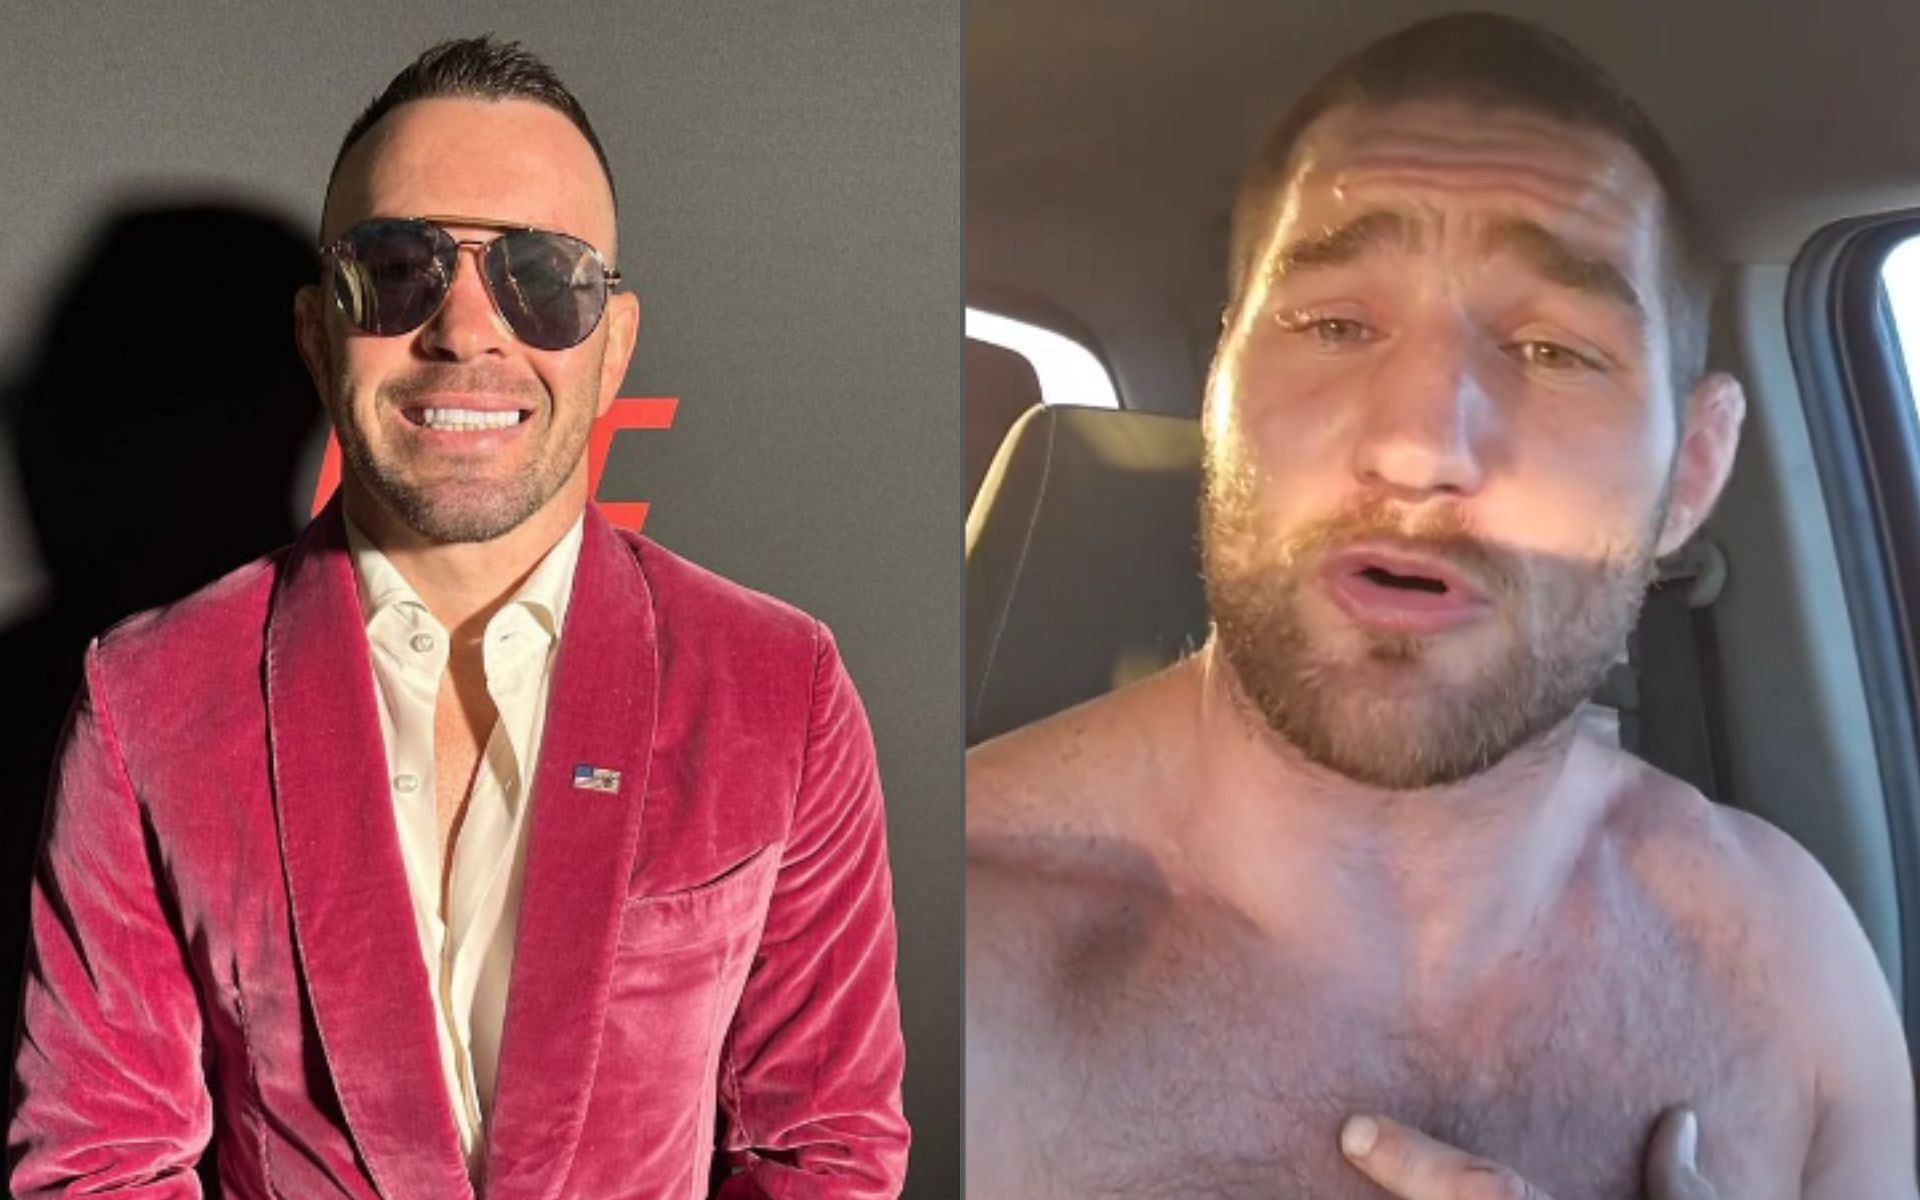 Colby Covington [Left] received backlash from a Bellator champion for his comments on Sean Strickland [Right] [Image courtesy: @colbycovington @stricklandmma - Instagram]